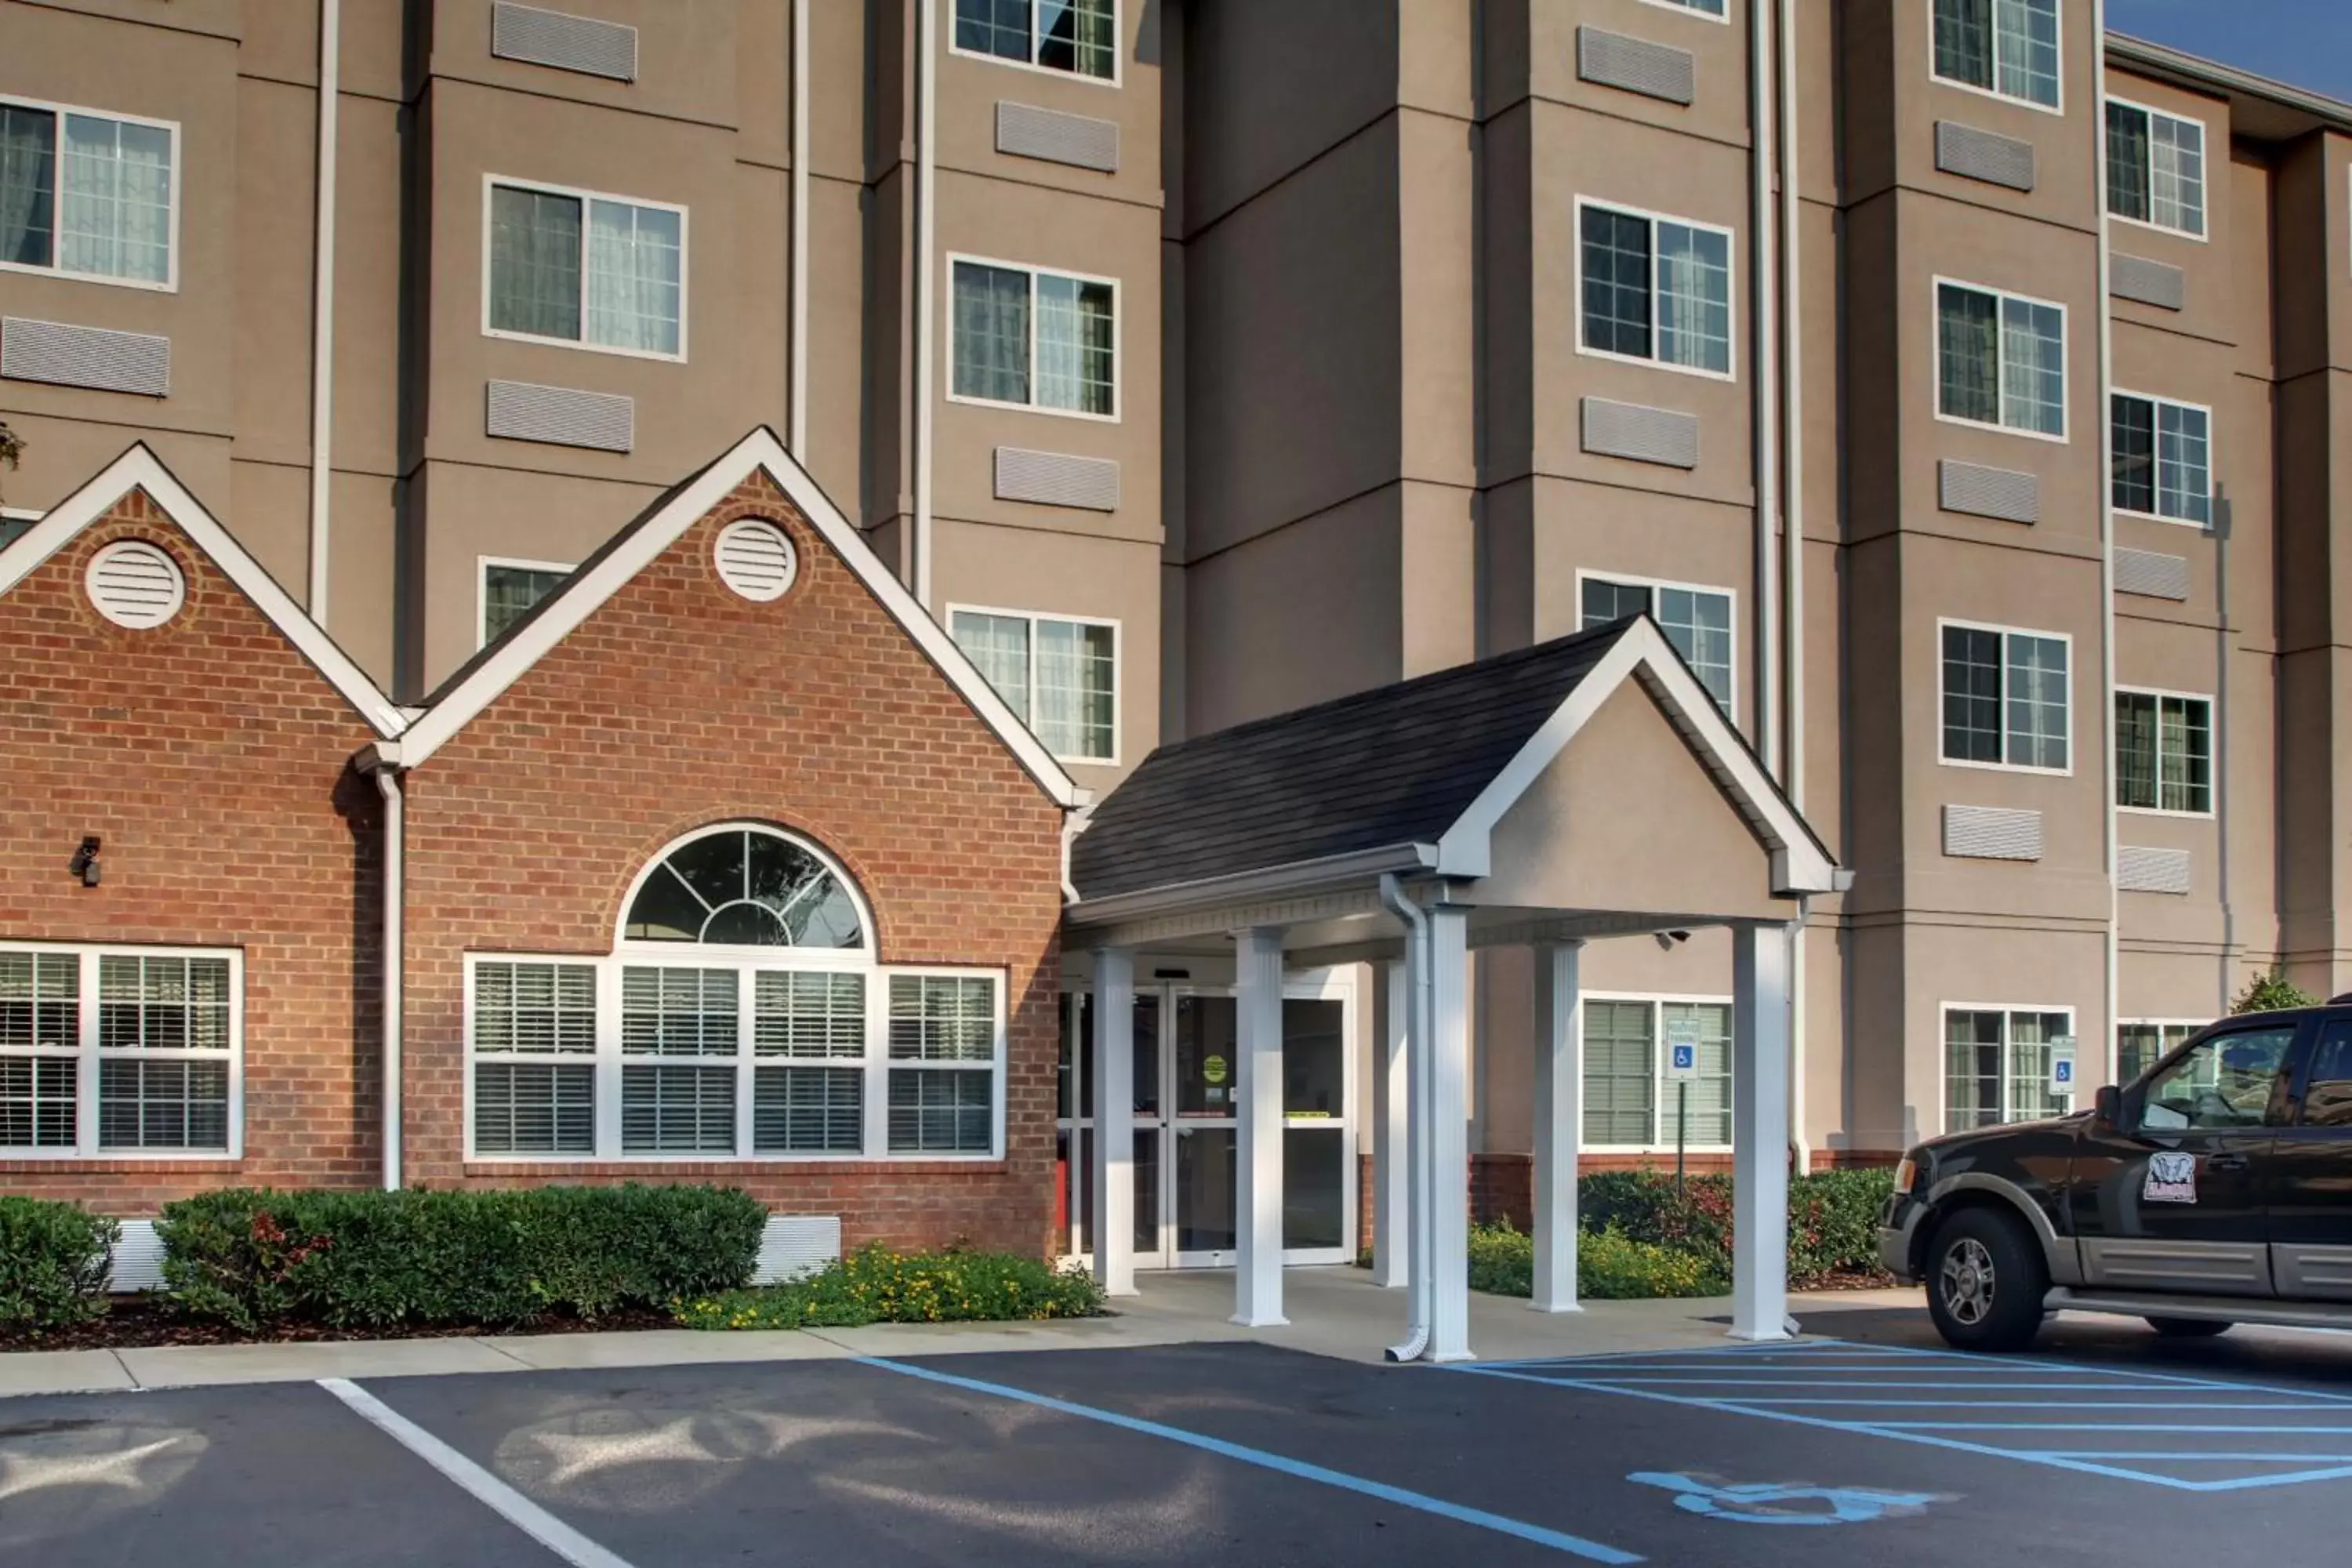 Facade/entrance, Property Building in Microtel Inn & Suites by Wyndham Tuscaloosa